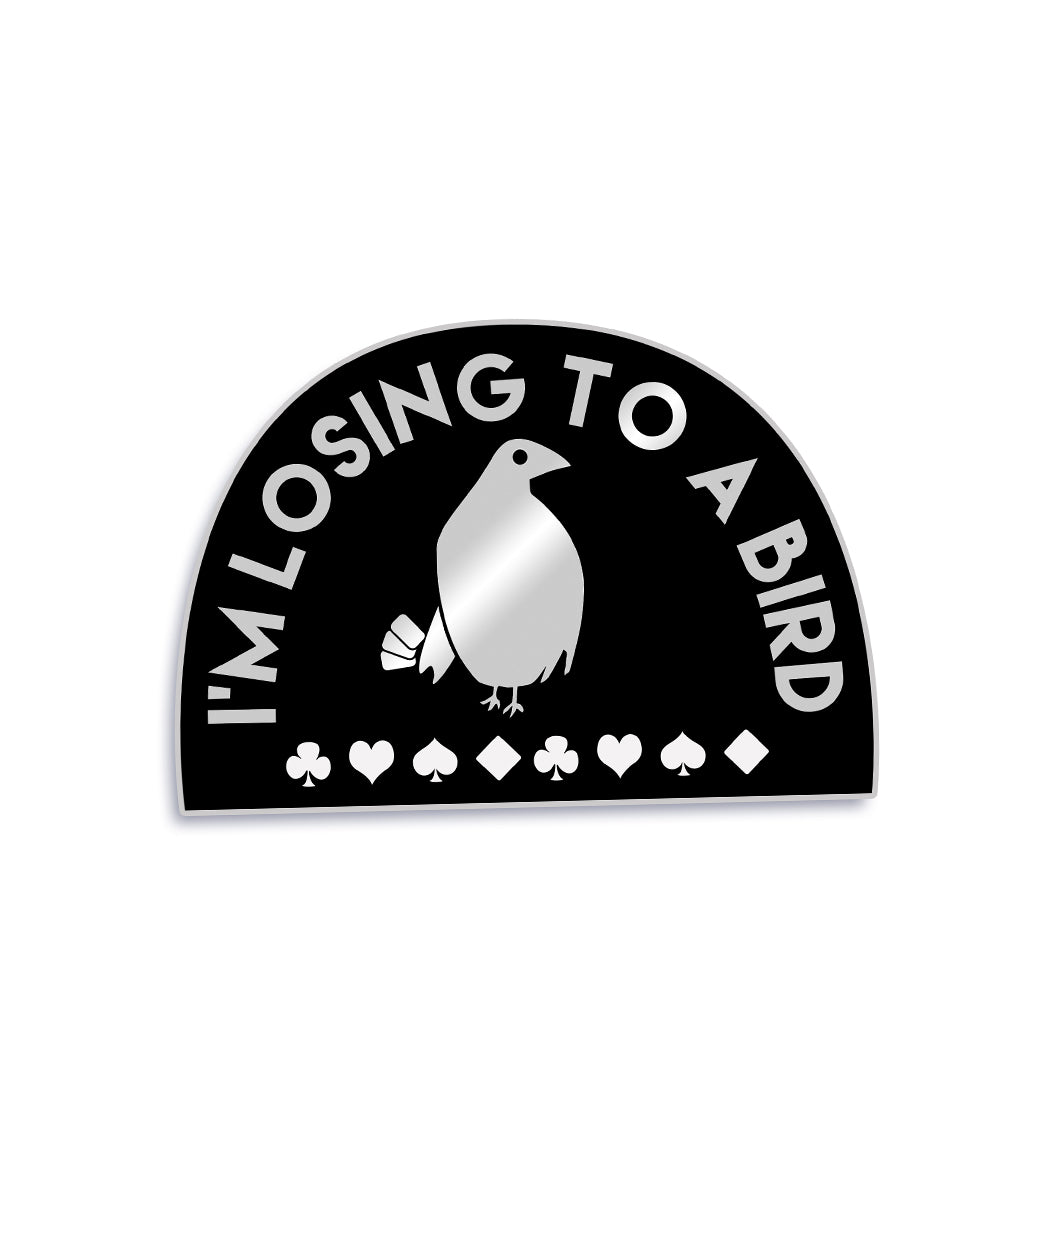 Black half circle pin with a thin silver border. “I’m losing to a bird” is arched in silver sans serif font. In the center is a silhouette drawing of a silver bird with a black eye holding four cards standing above card suits - from Lindsay Ellis